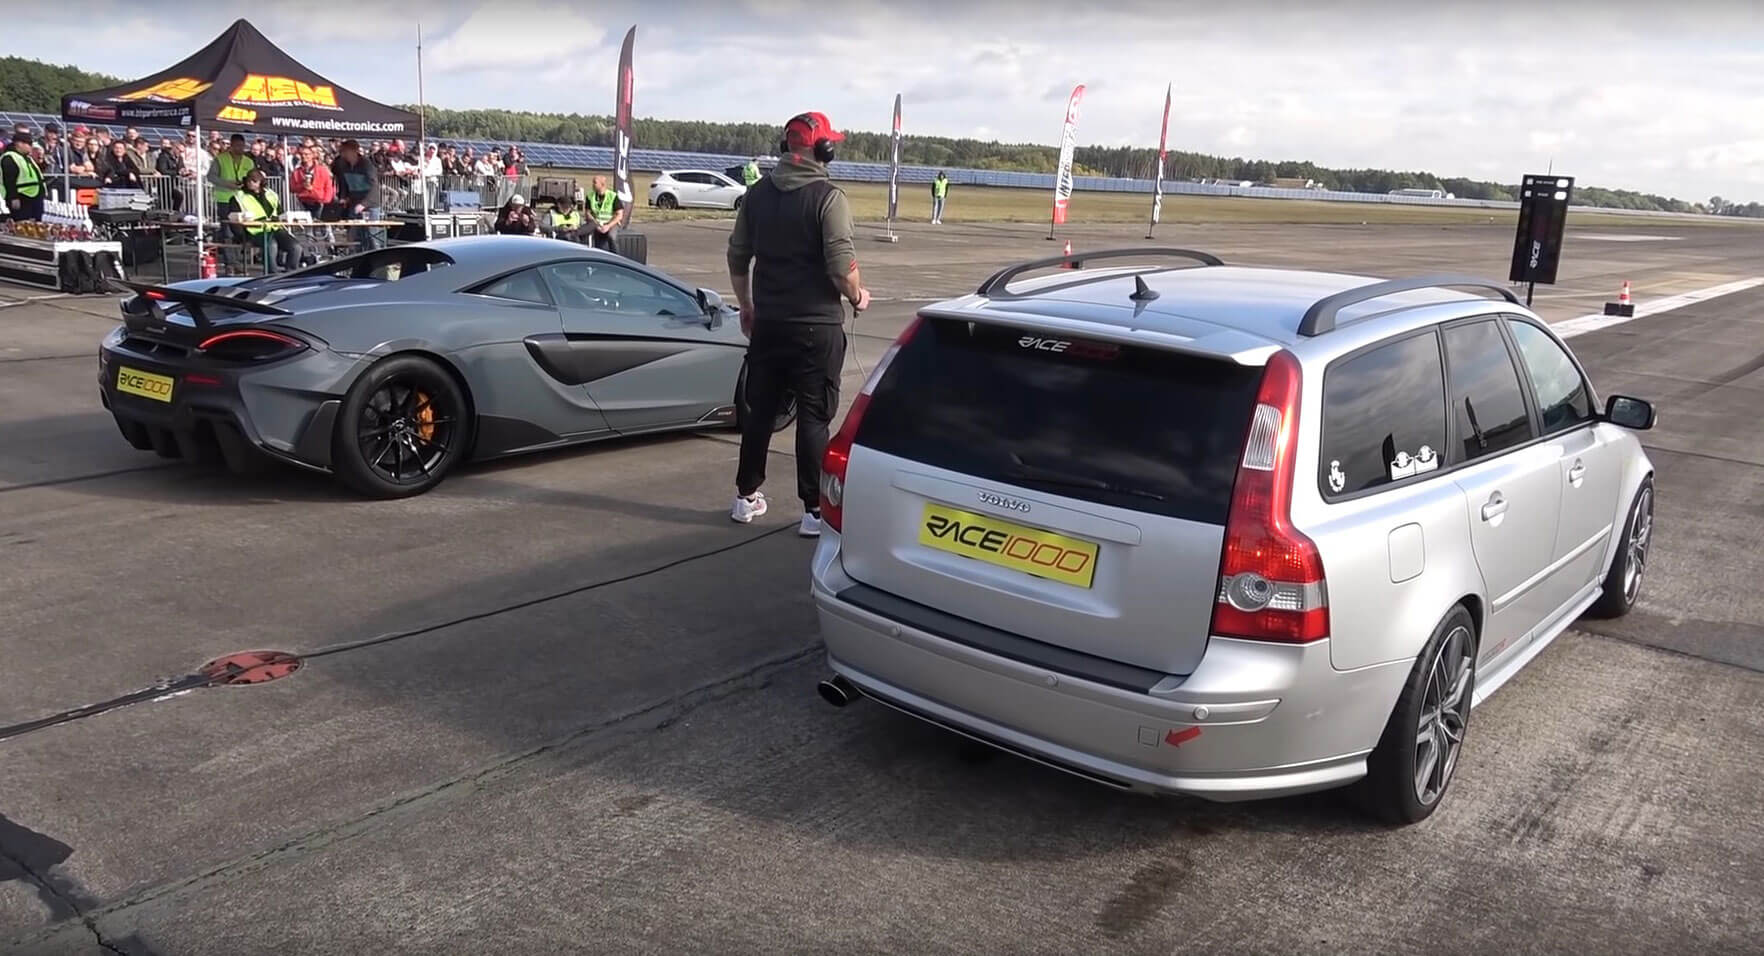 Surely A Volvo V50 Can't Beat A McLaren 600LT – Or Can It?